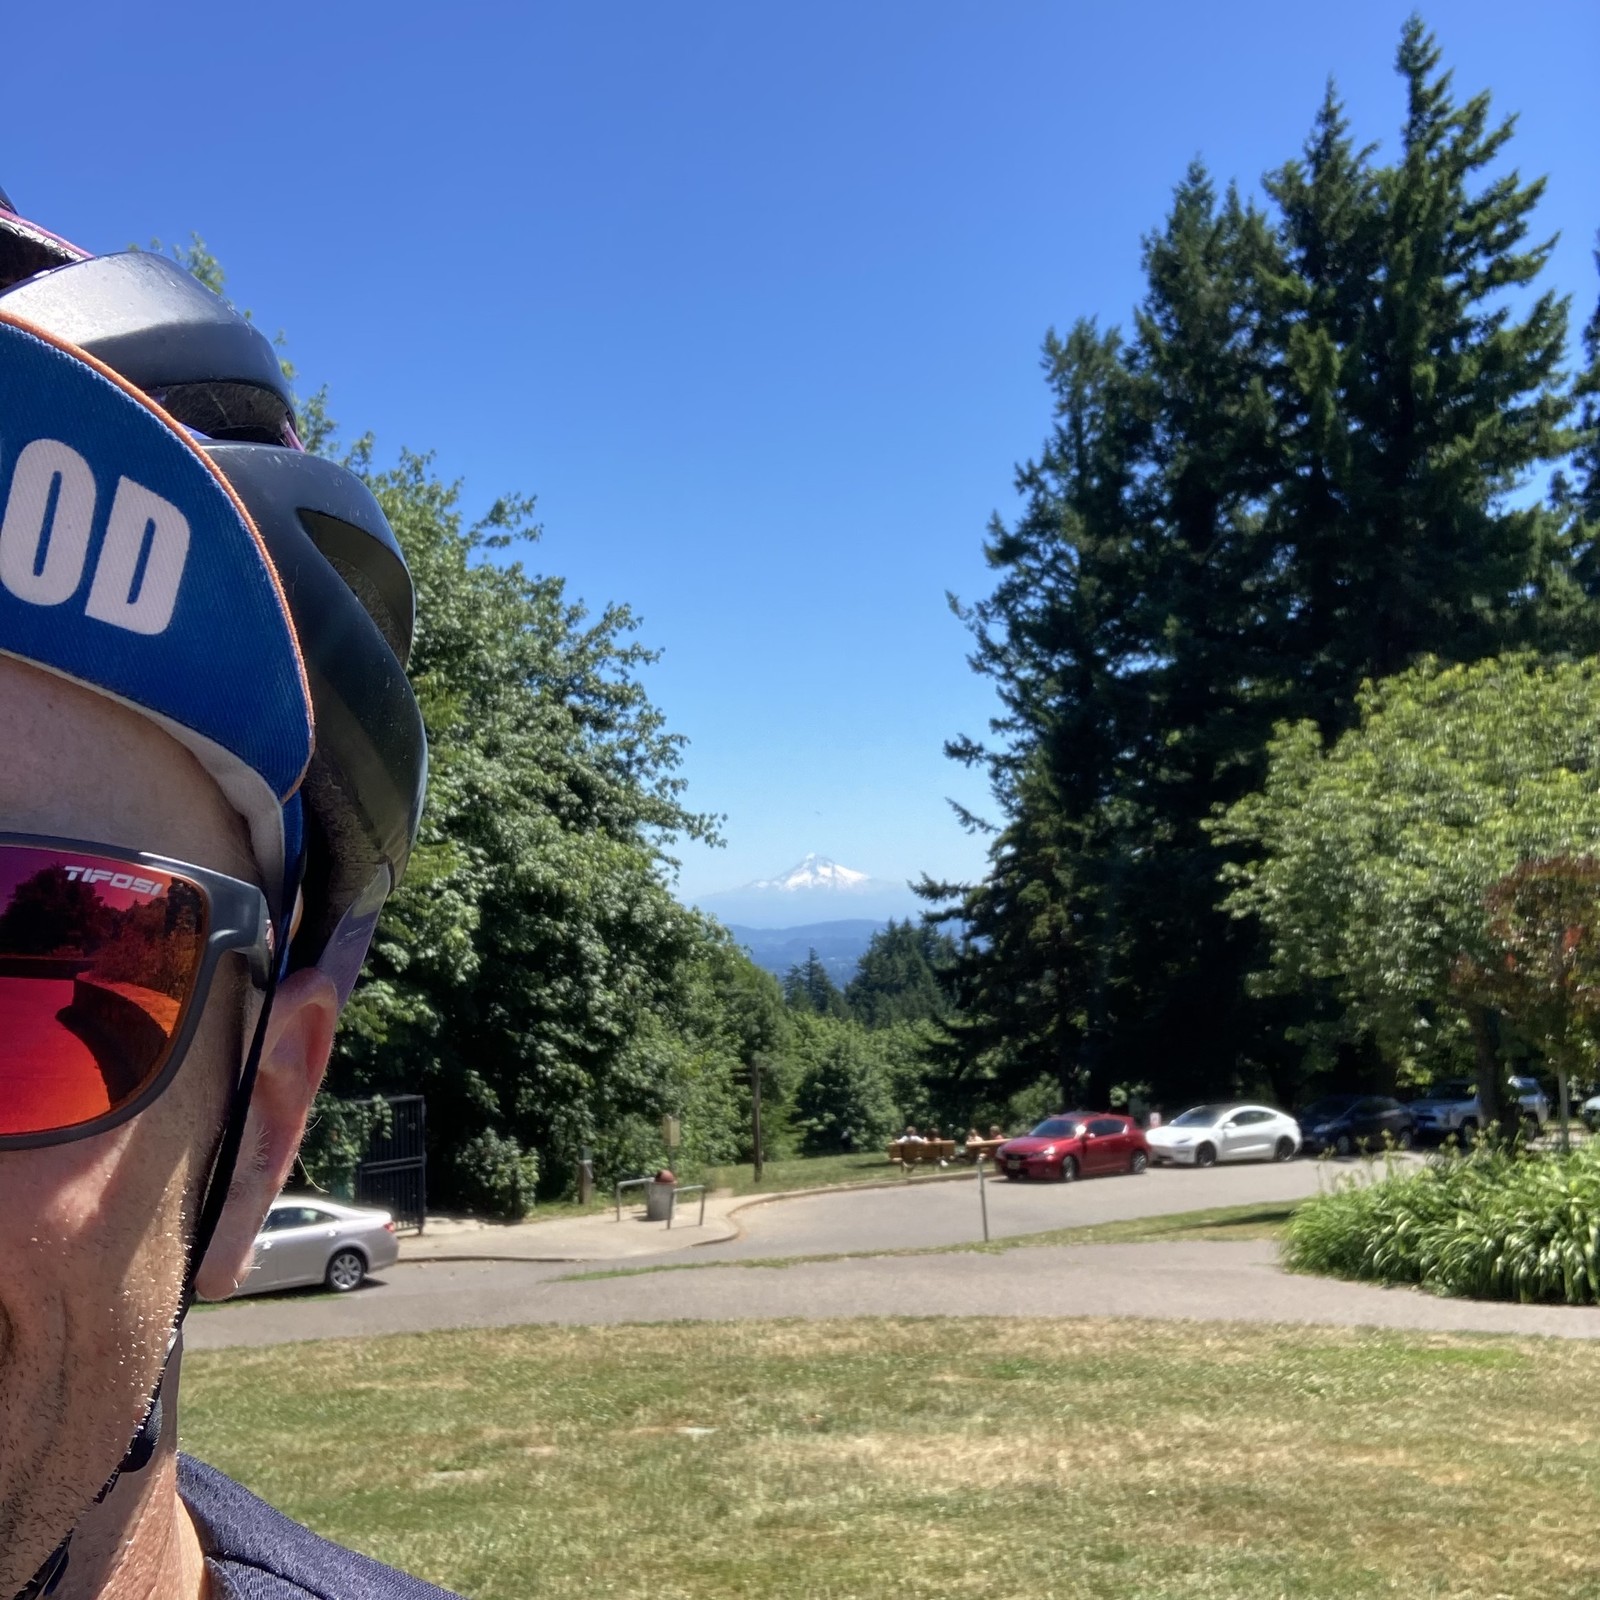 Selfie taken in front of Mt. Hood on a CRYSTAL clear day at solar noon. Only part of my face is visible in the foreground, I am wearing reflective sunglasses and a bicycle cap that reads “Sellwood”